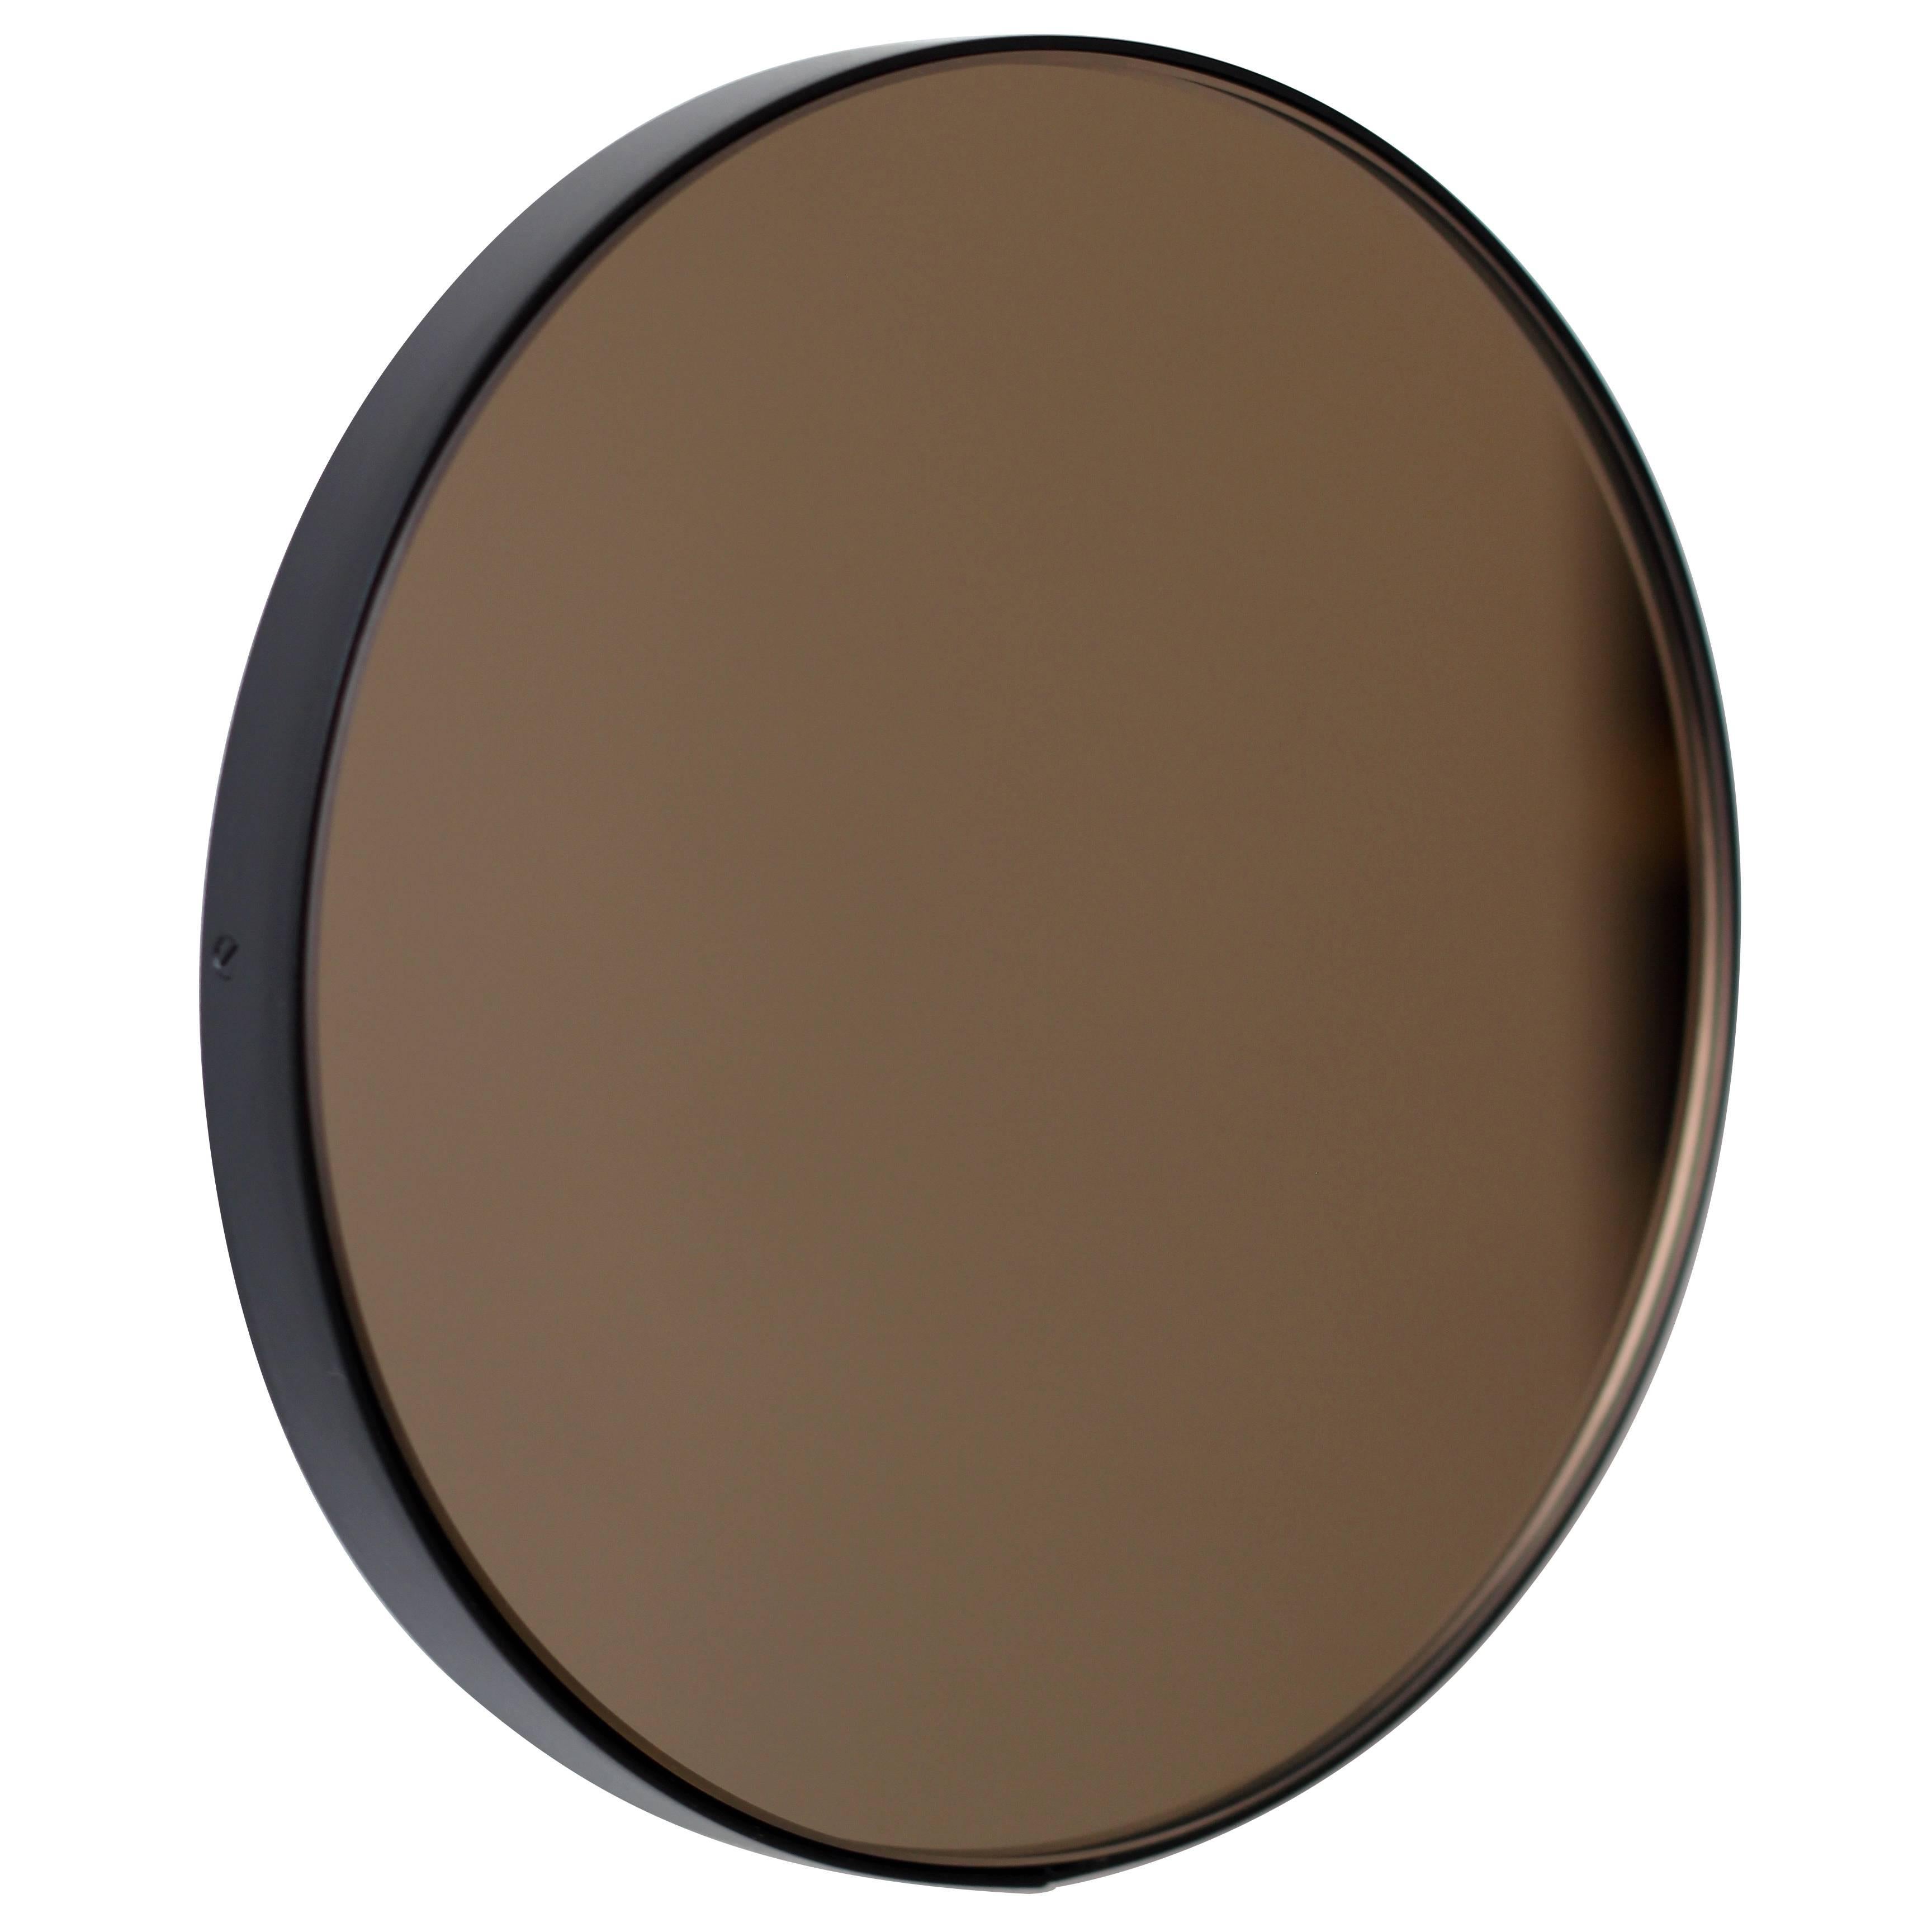 Orbis Bronze Tinted Bespoke Contemporary Round Mirror with Black Frame - Large